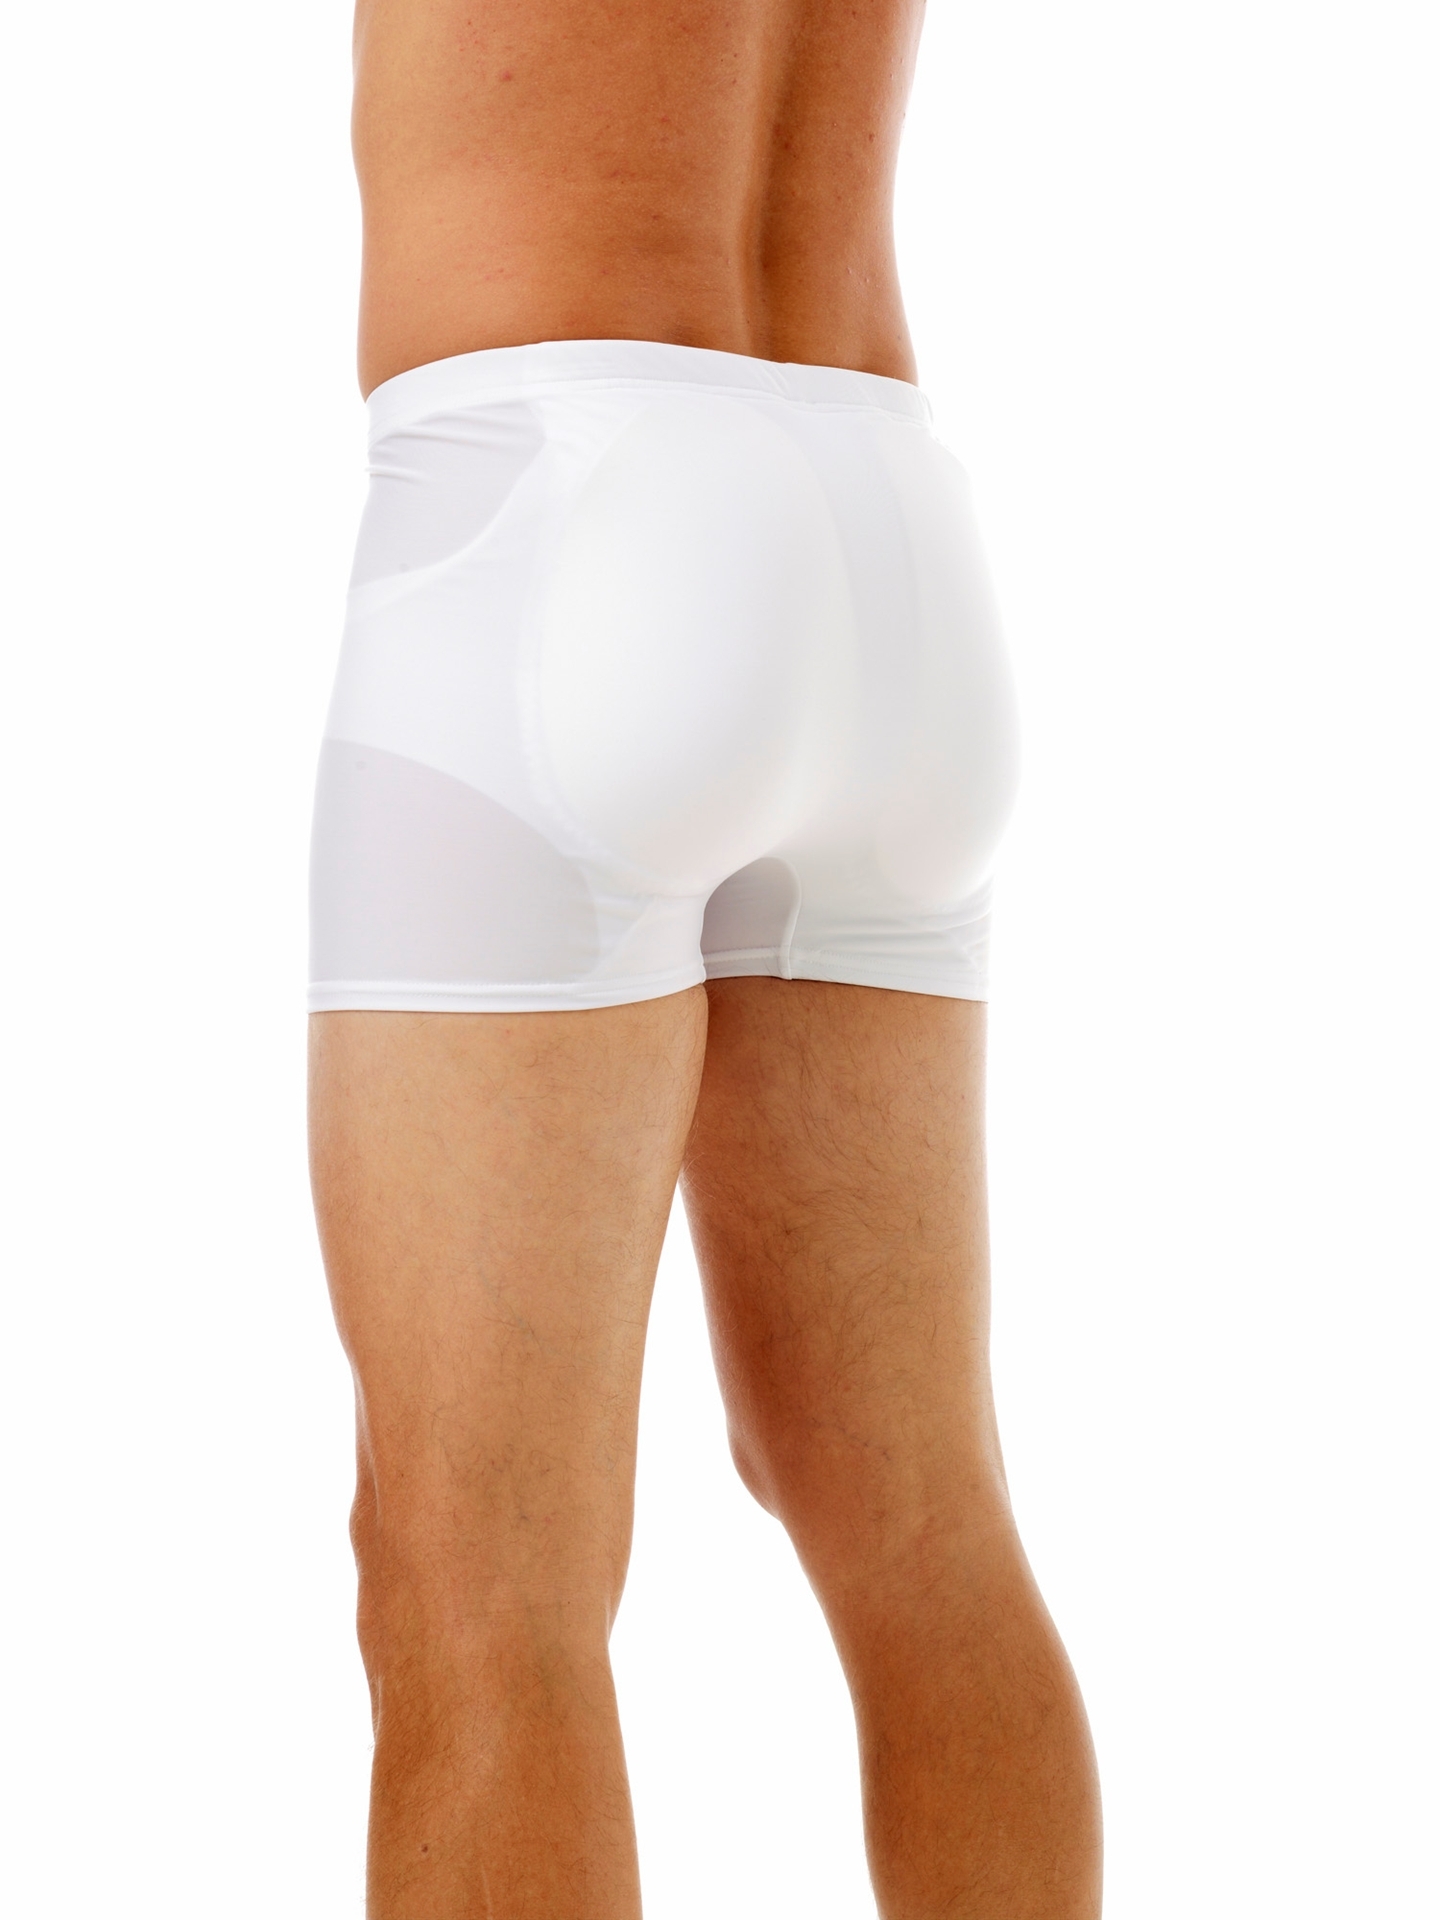 Padded Boxers. Men Compression Shirts, Girdles, Chest Binders